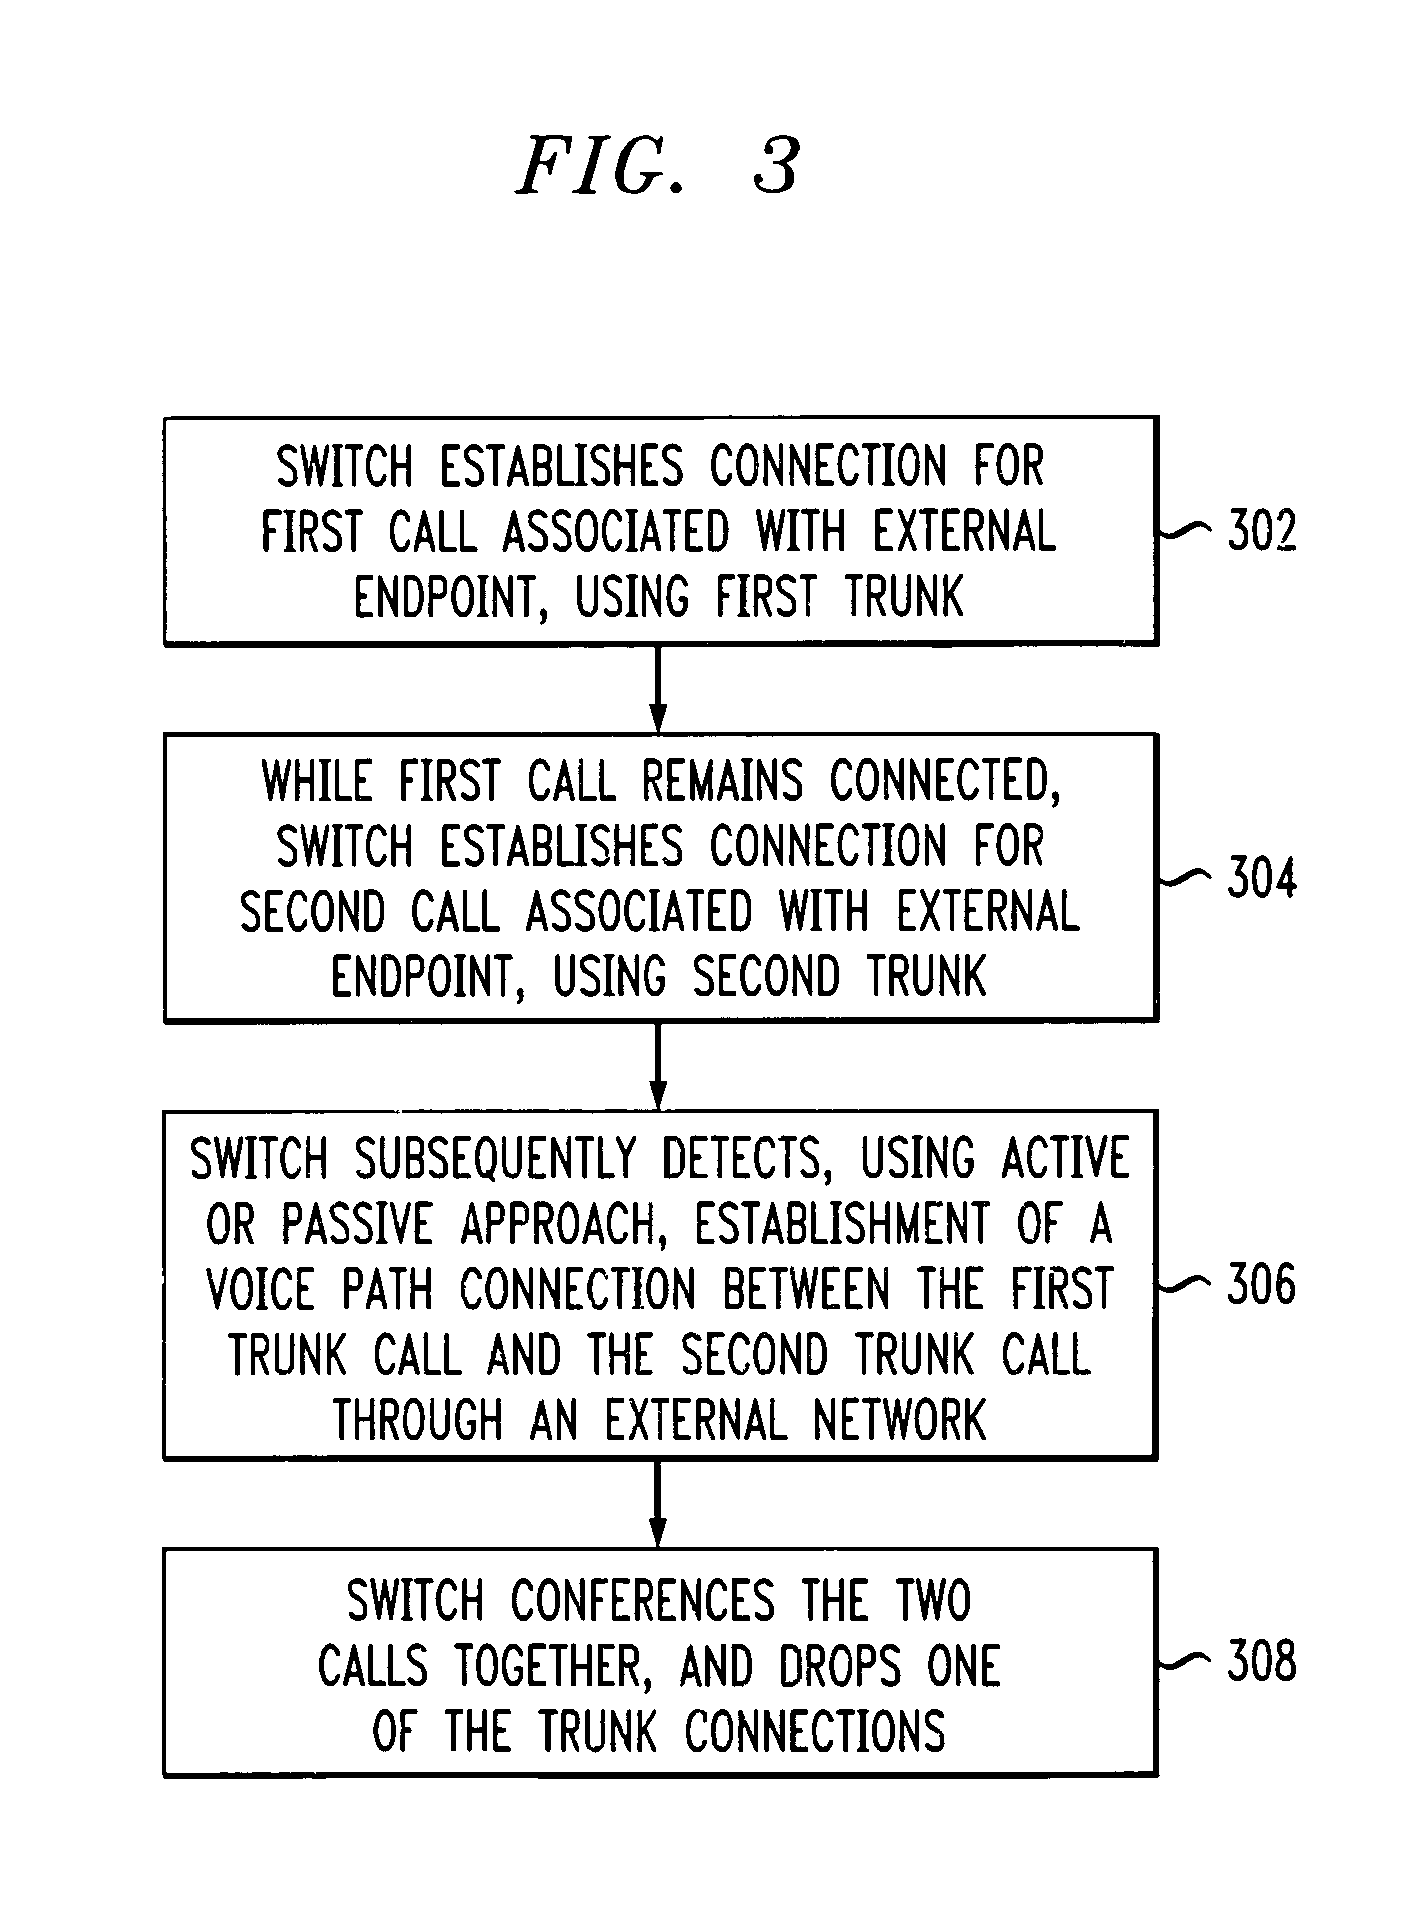 Switch-based call processing with detection of voice path connection between multiple trunks in external network